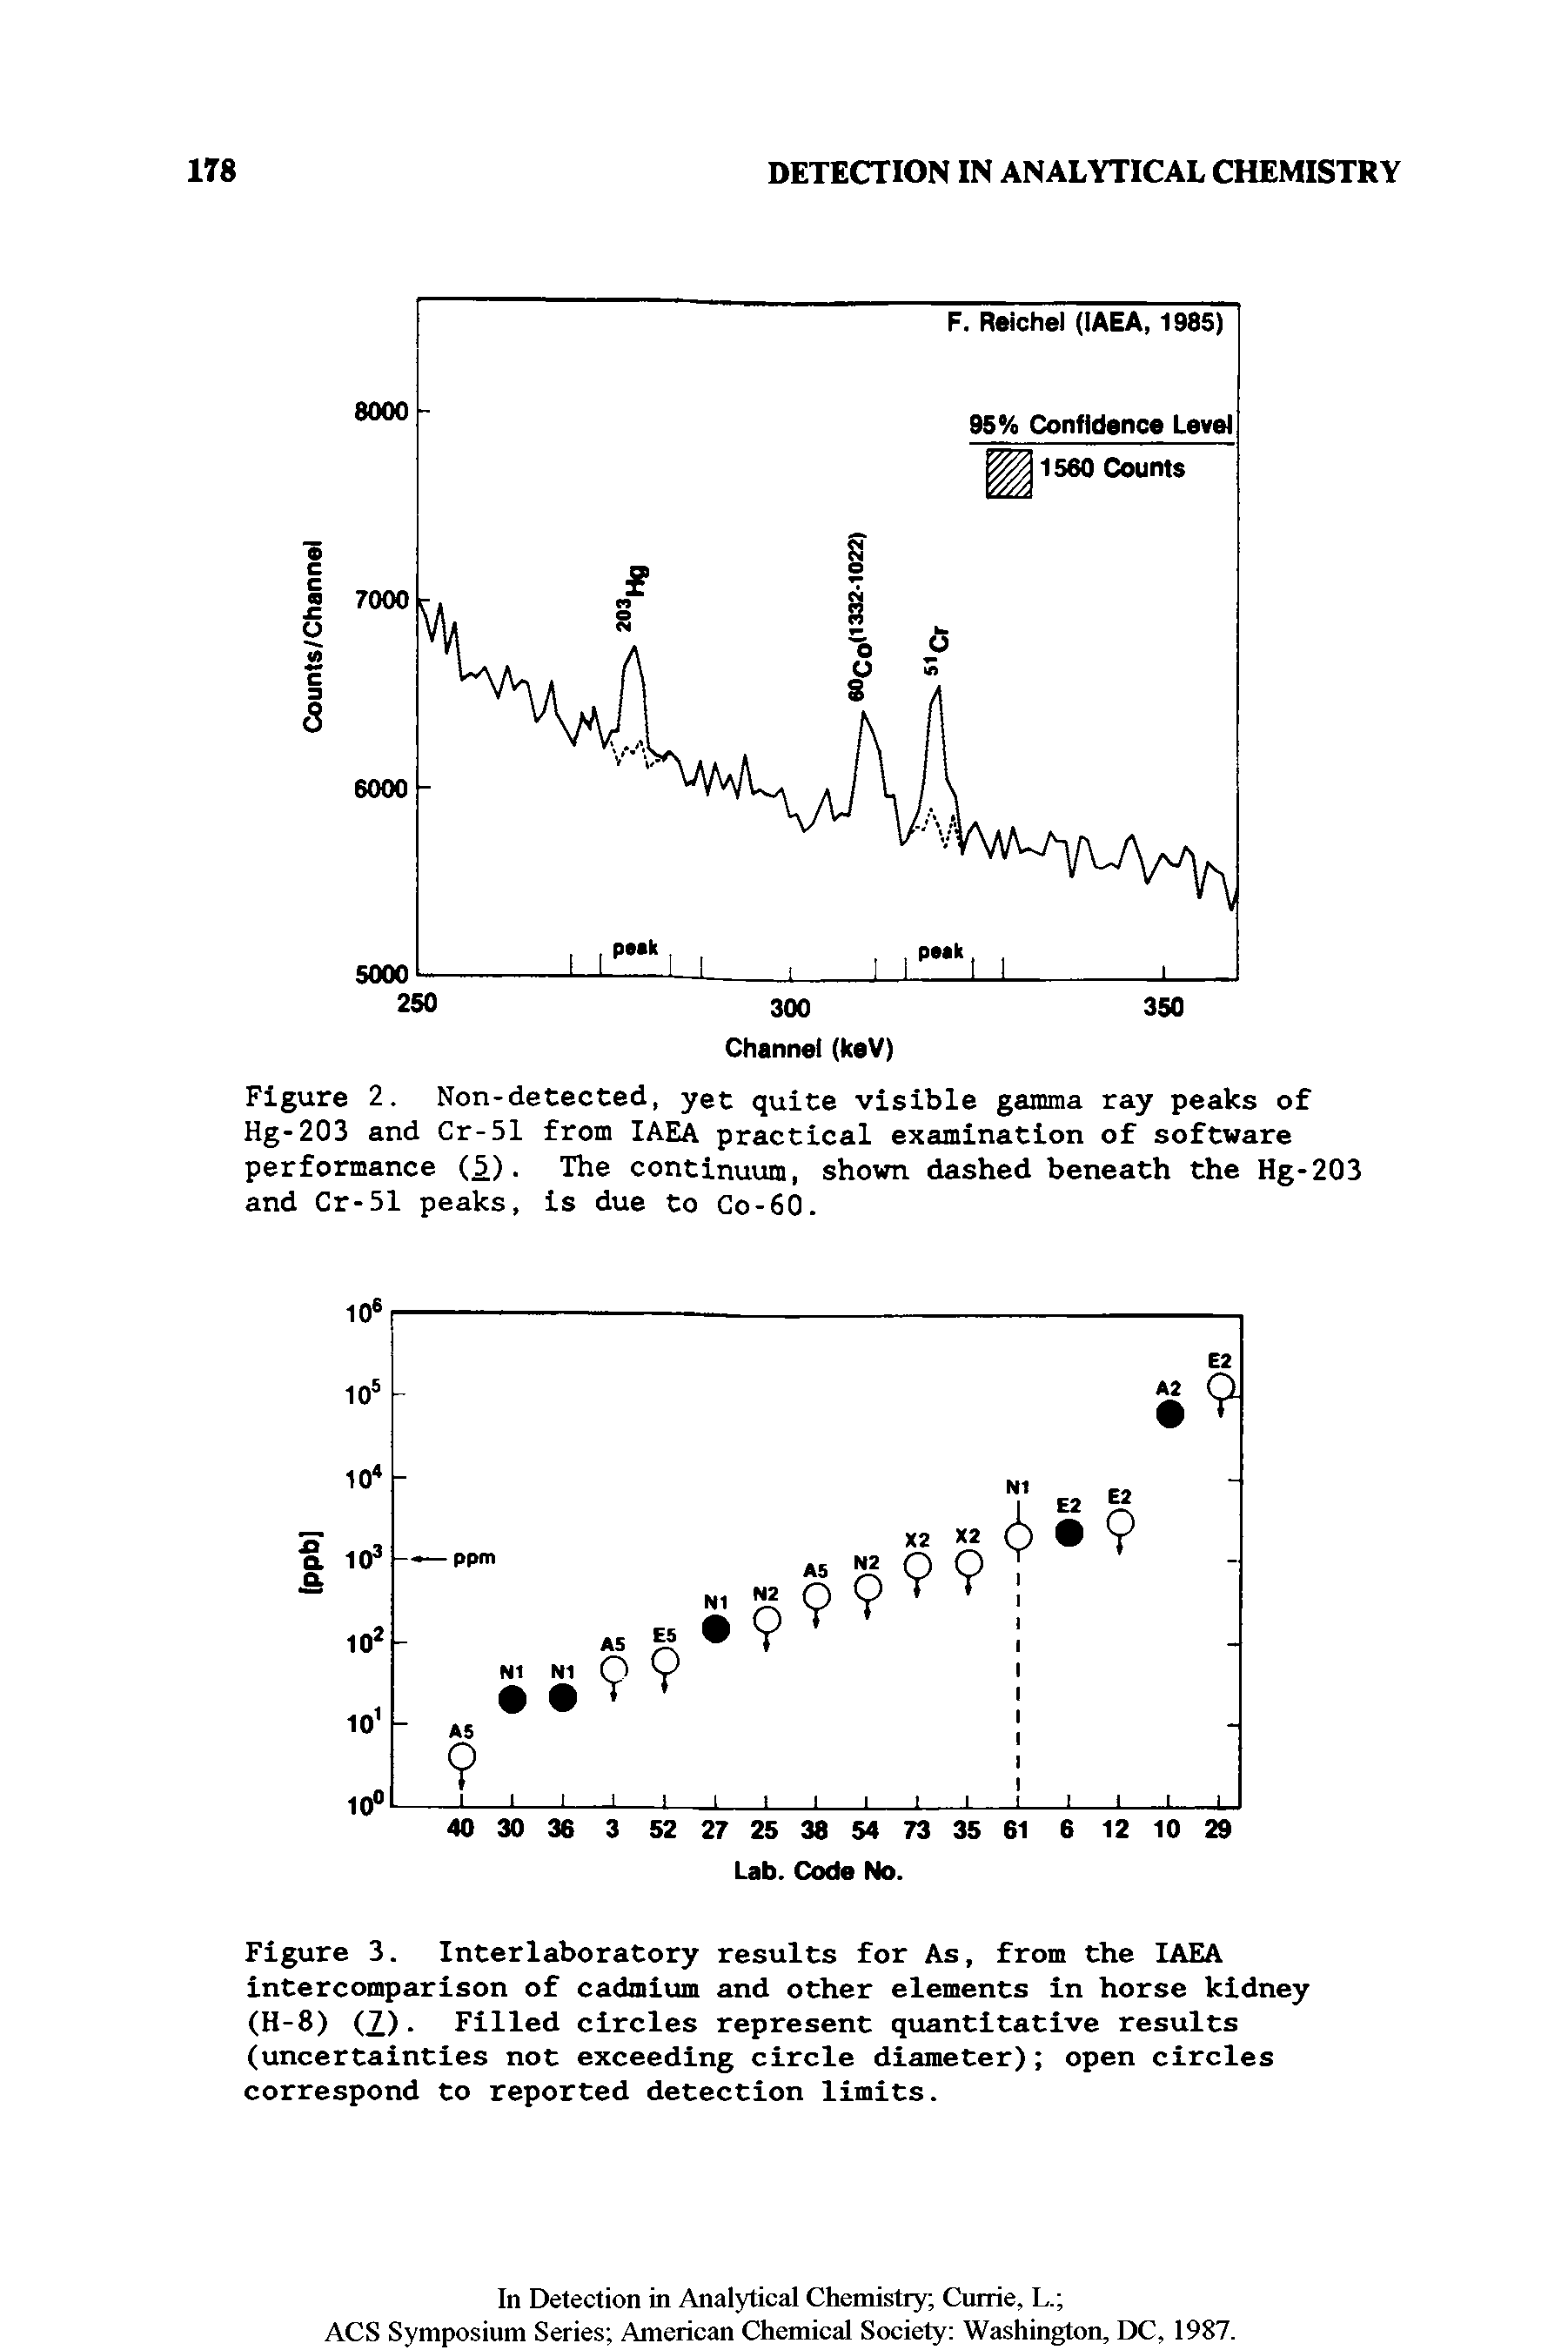 Figure 2. Non-detected, yet quite visible gamma ray peaks of Hg-203 and Cr-51 from IAEA practical examination of software performance (1). The continuum, shown dashed beneath the Hg-203 and Cr-51 peaks, is due to Go-60.